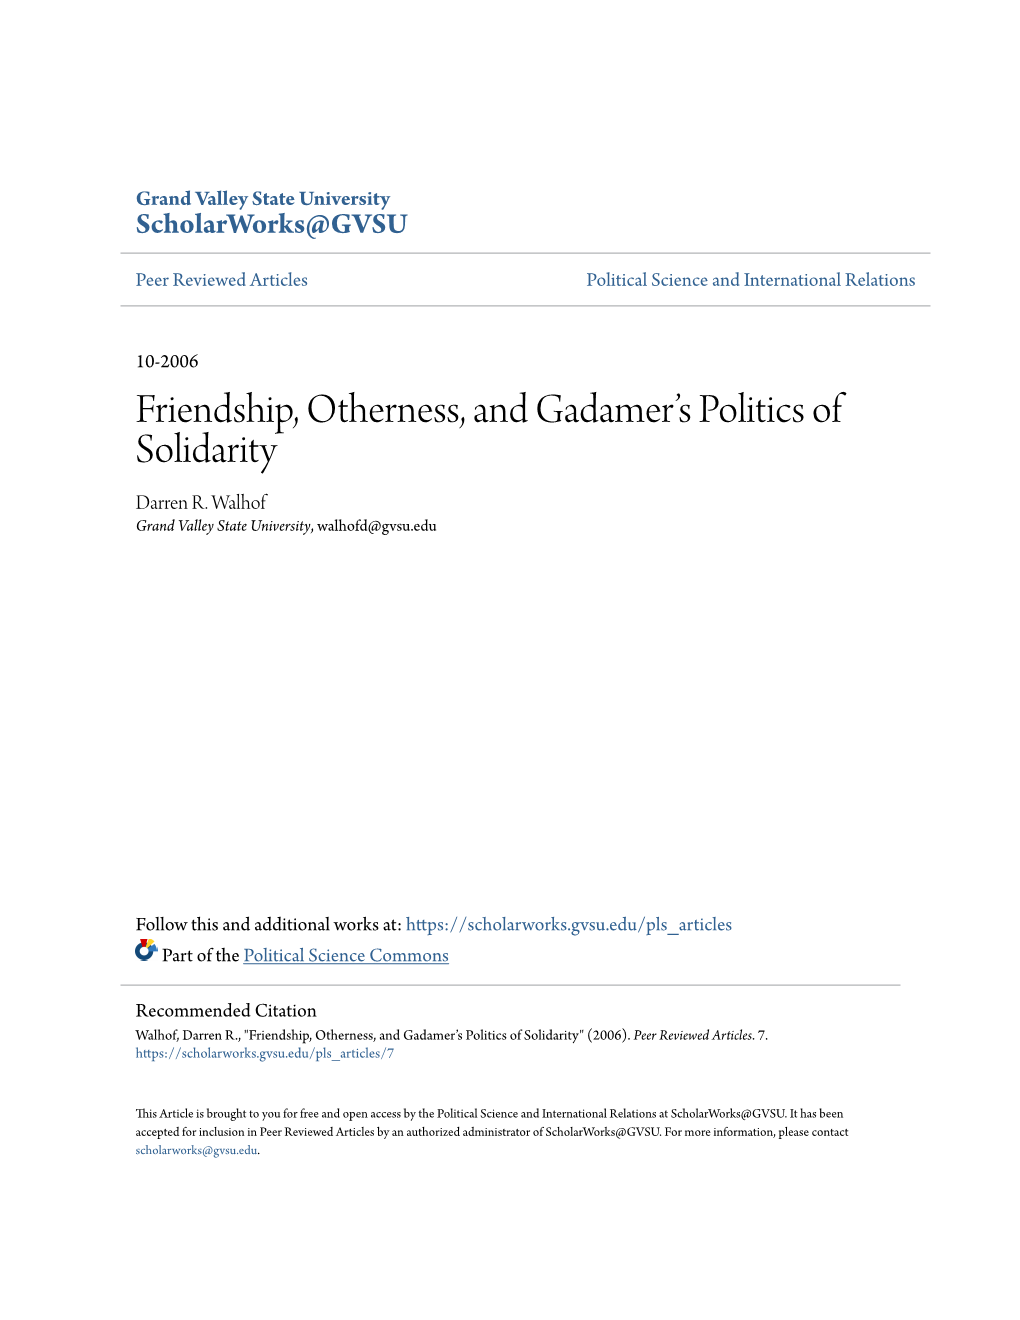 Friendship, Otherness, and Gadamer's Politics of Solidarity